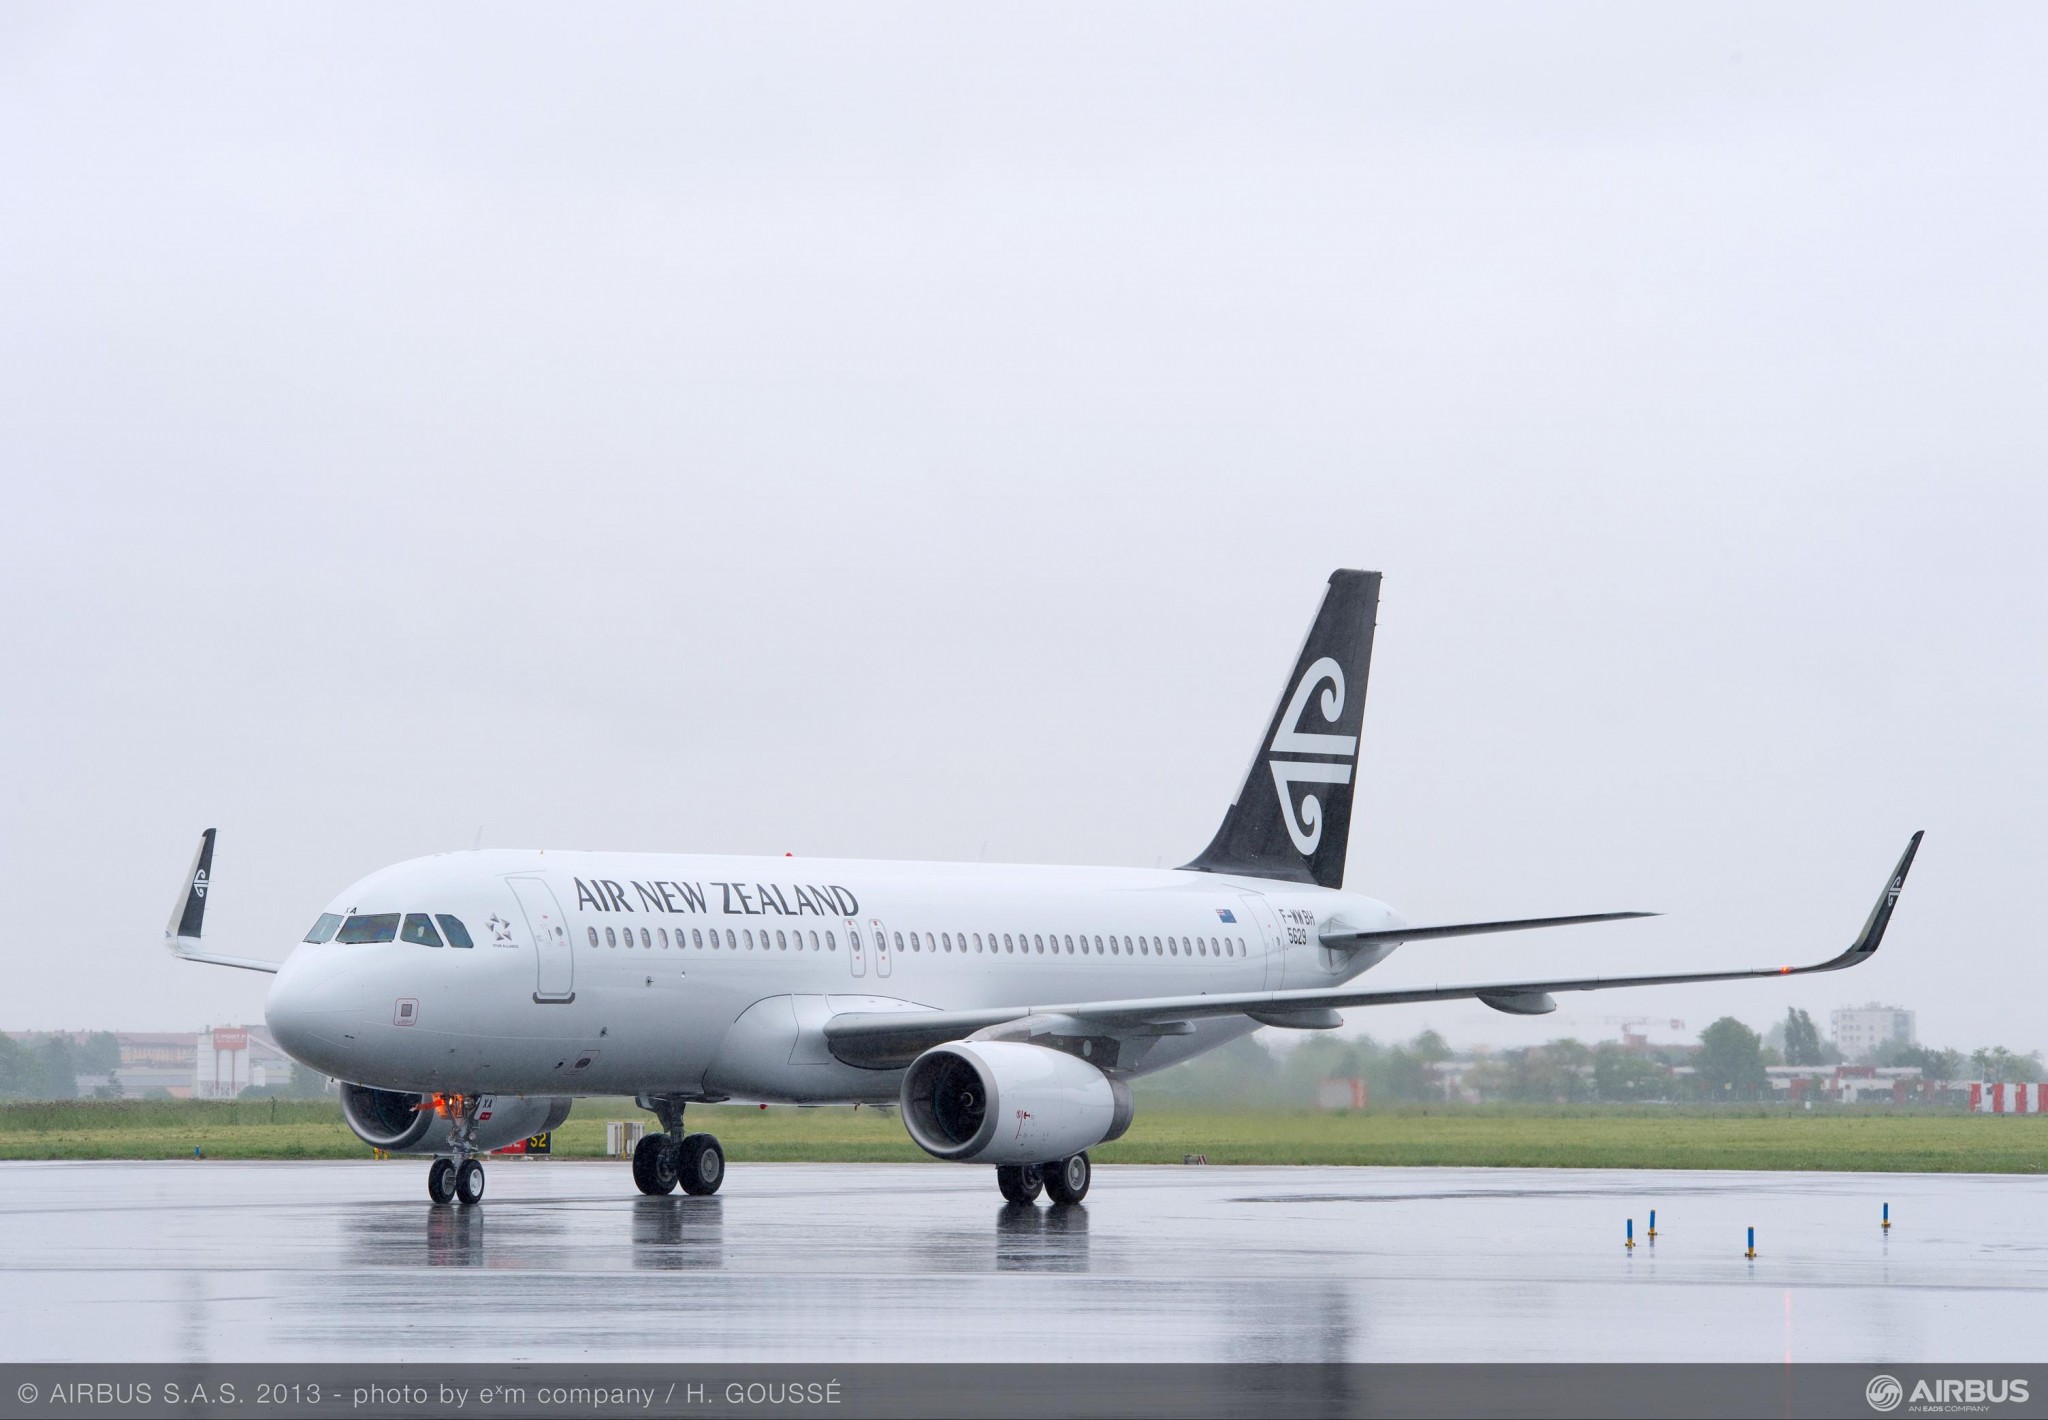 Air New Zealand grounds two aircraft due to Pratt & Whitney engine issues